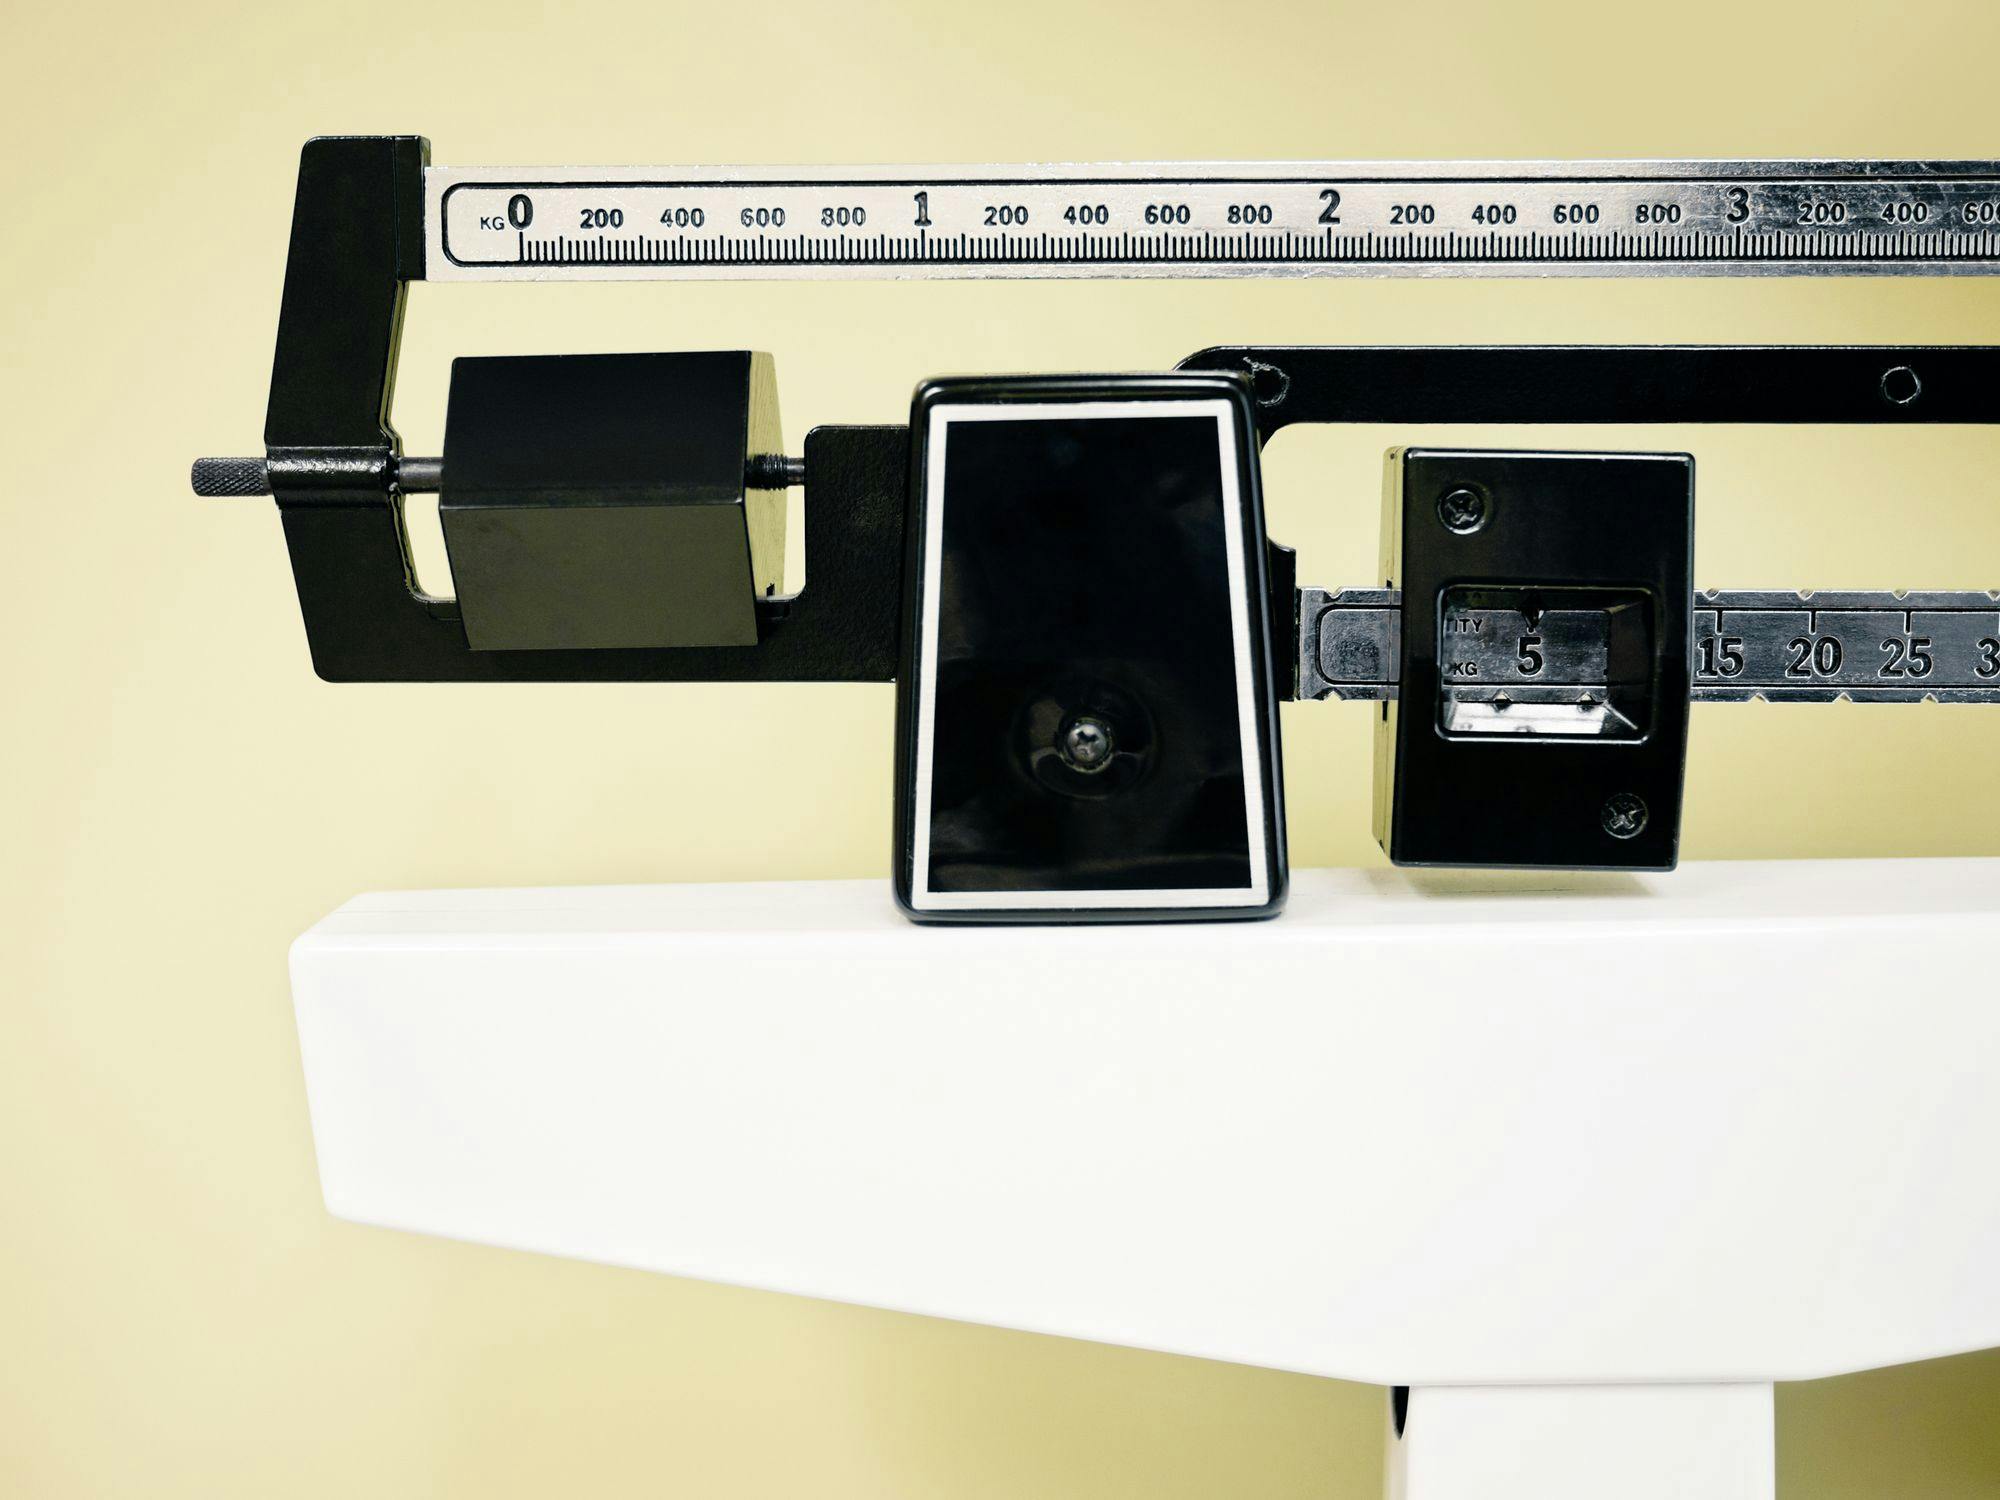 Close-up image of a scale in a health care center